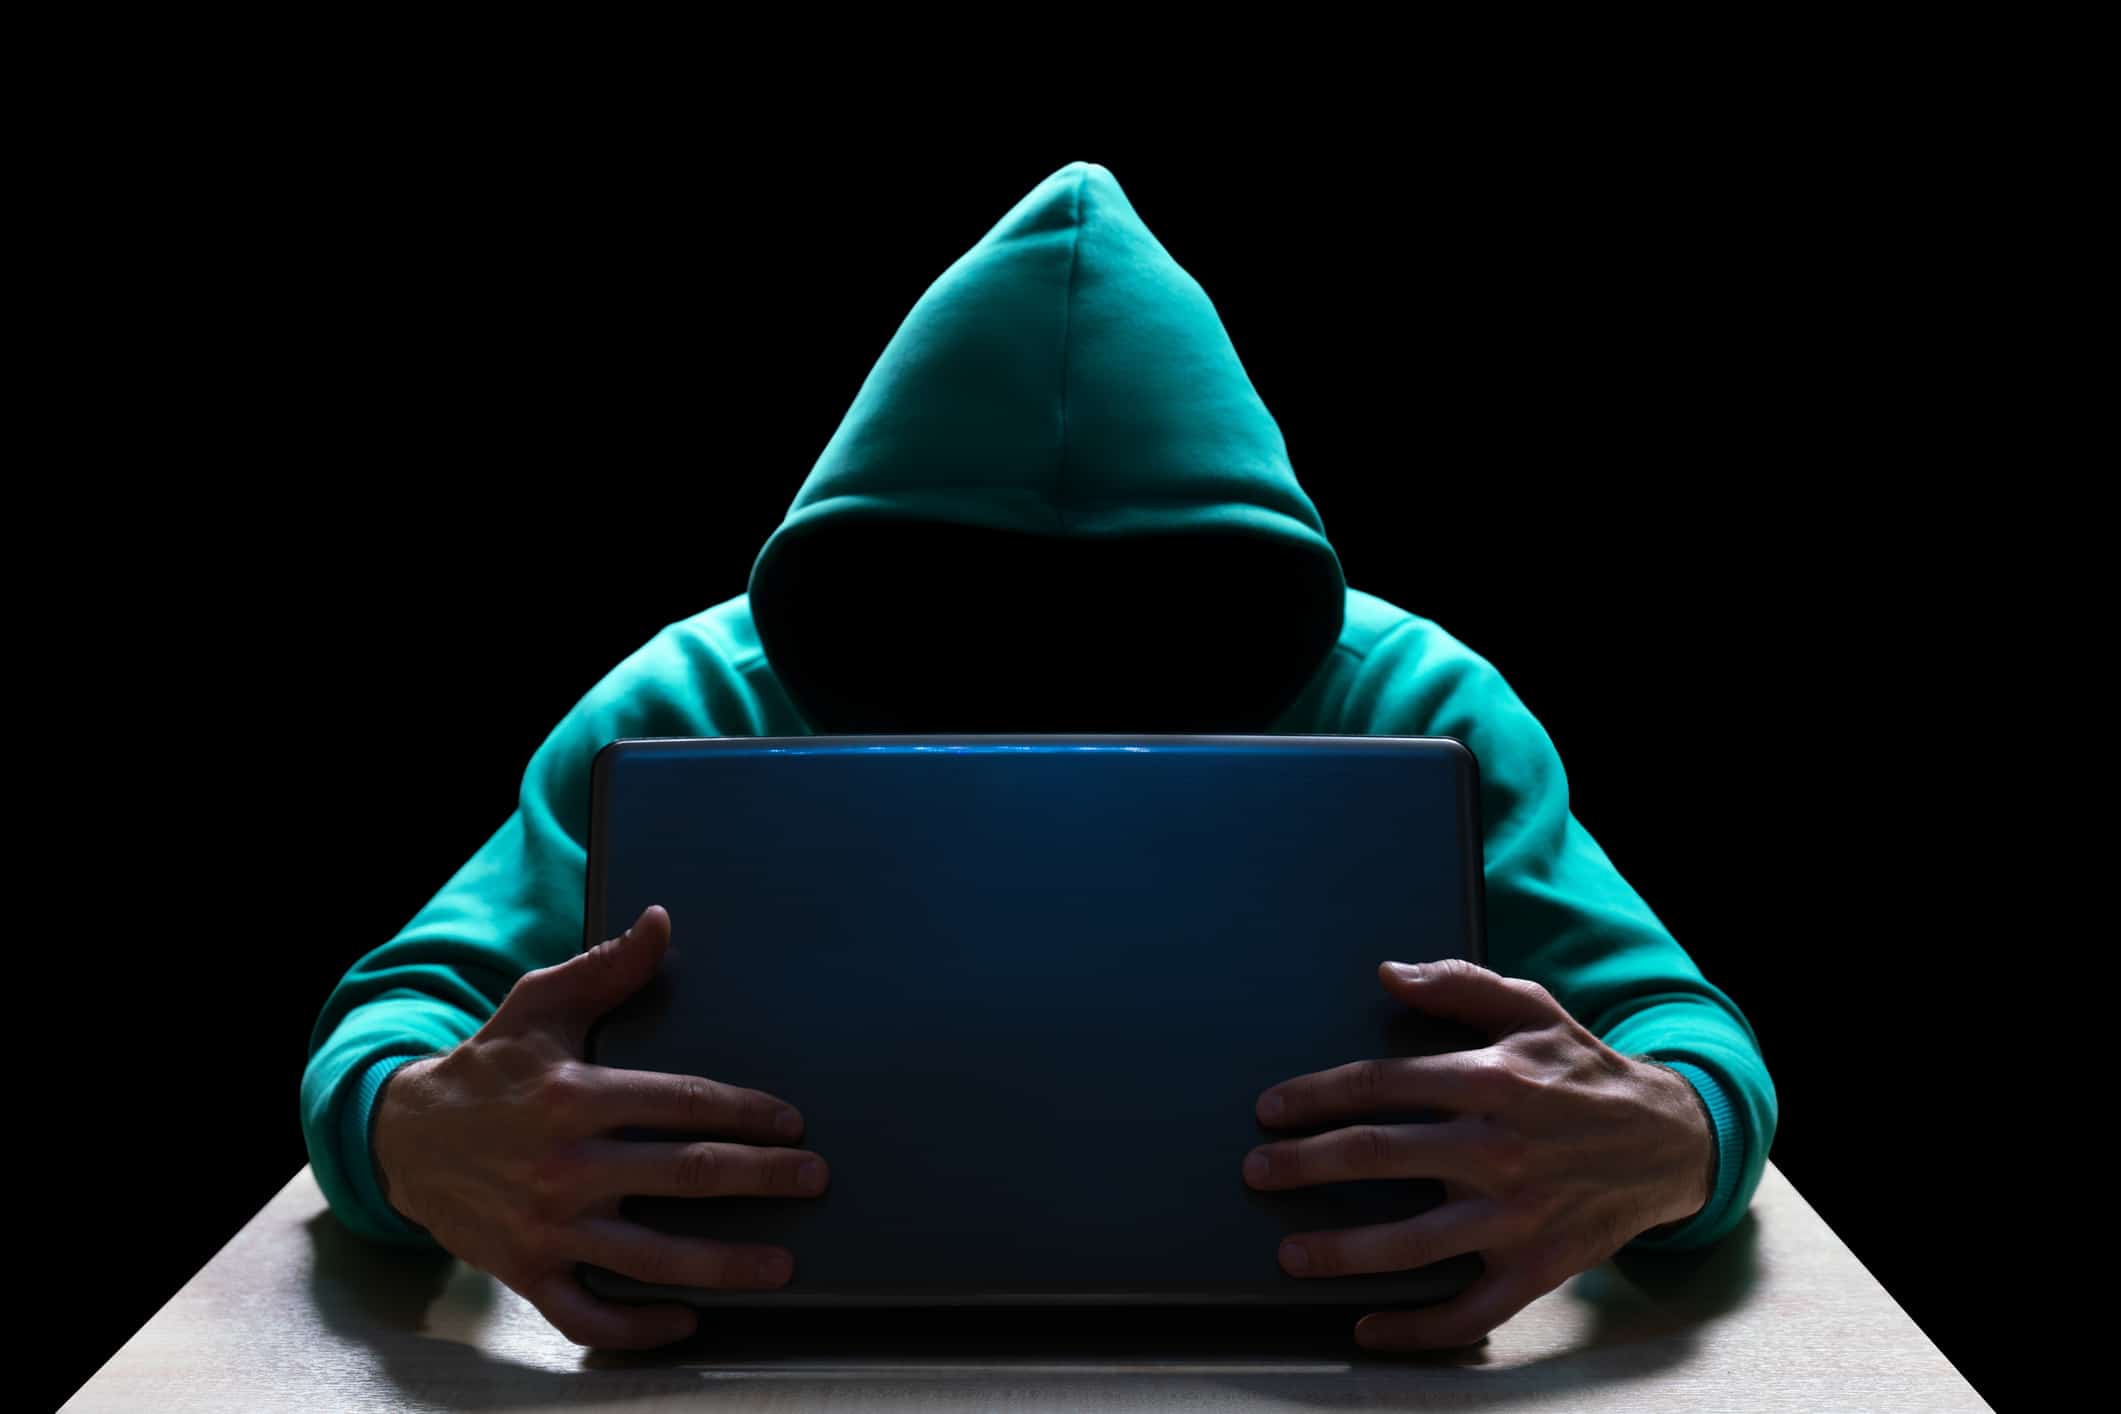 Unknown person in the hood, reaches out from the darkness to the laptop. Theft of household and computer equipment